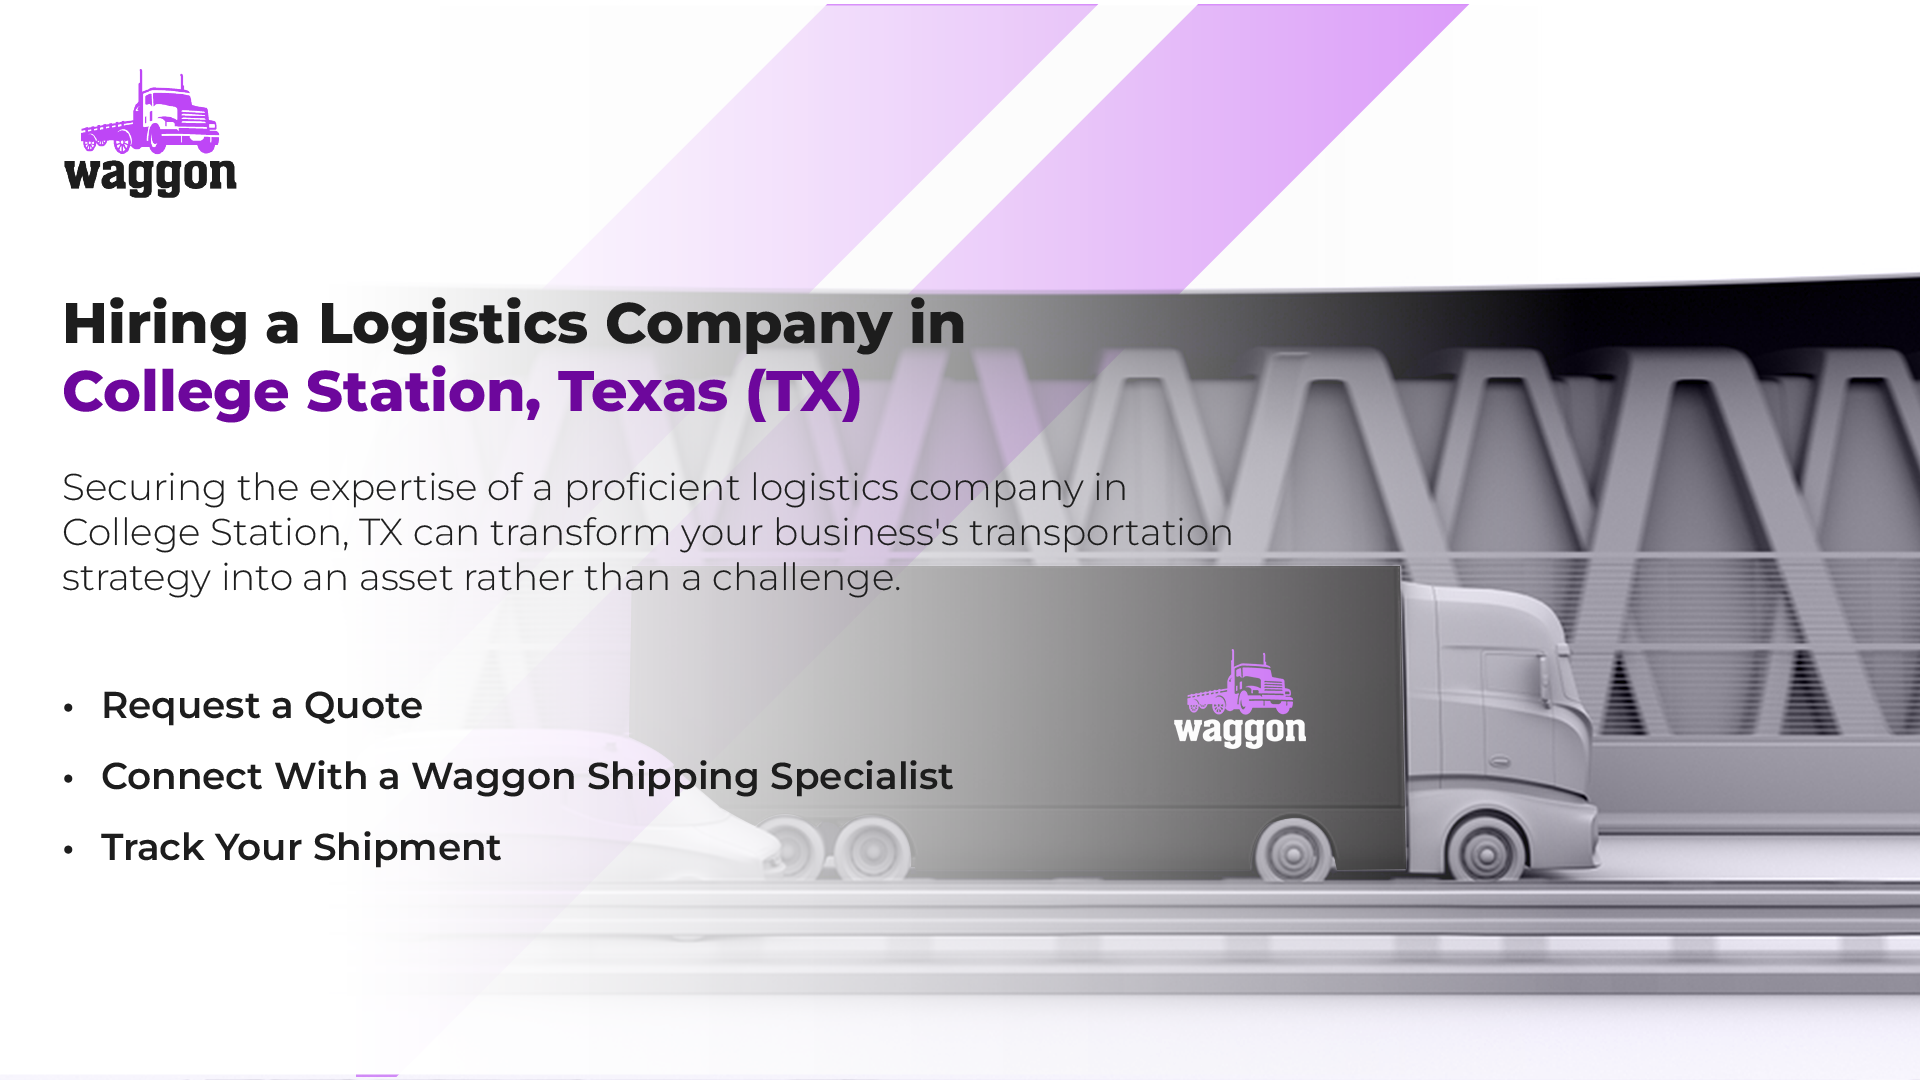 Hiring A Logistics Company in College Station, Texas (TX)